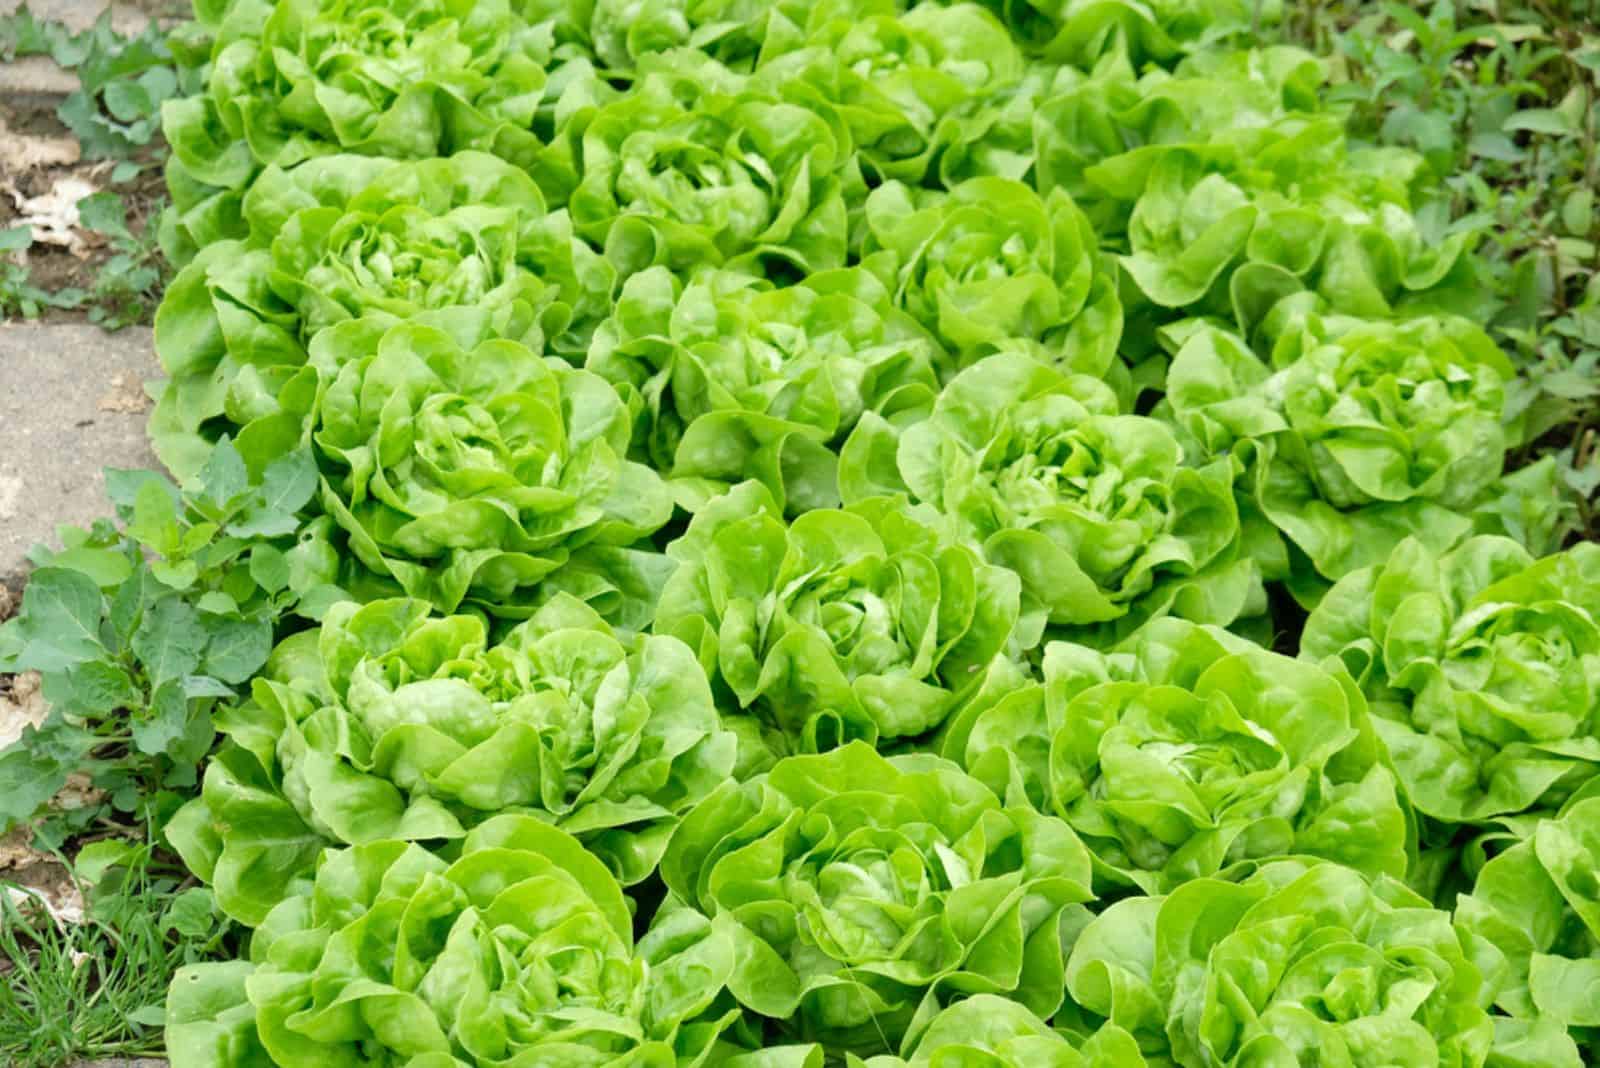 green heads of lettuce grow in a row in the field